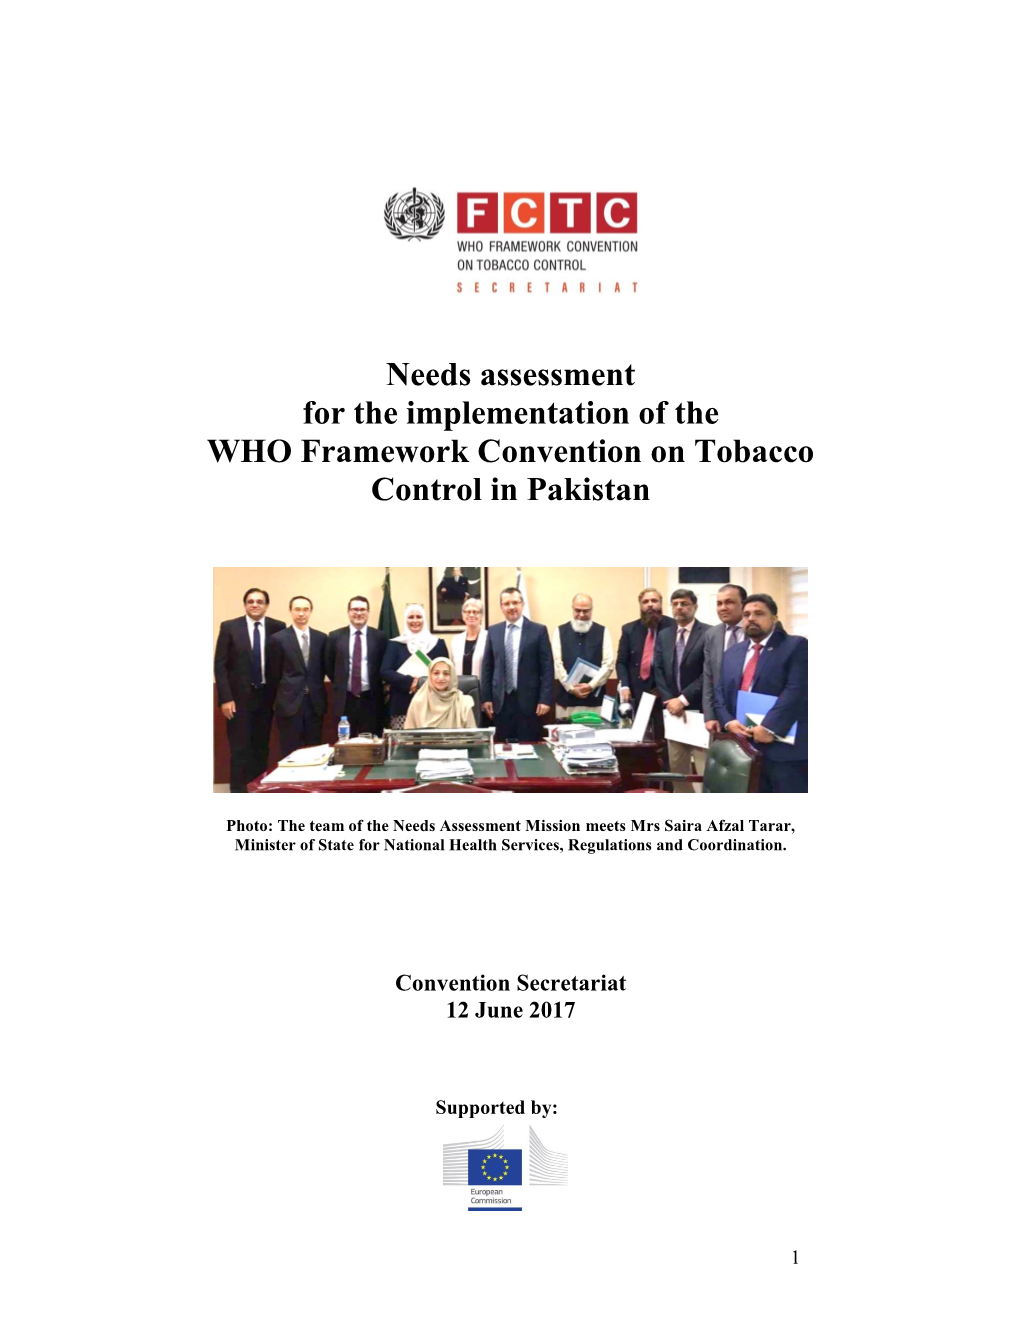 Needs Assessment for the Implementation of the WHO Framework Convention on Tobacco Control in Pakistan